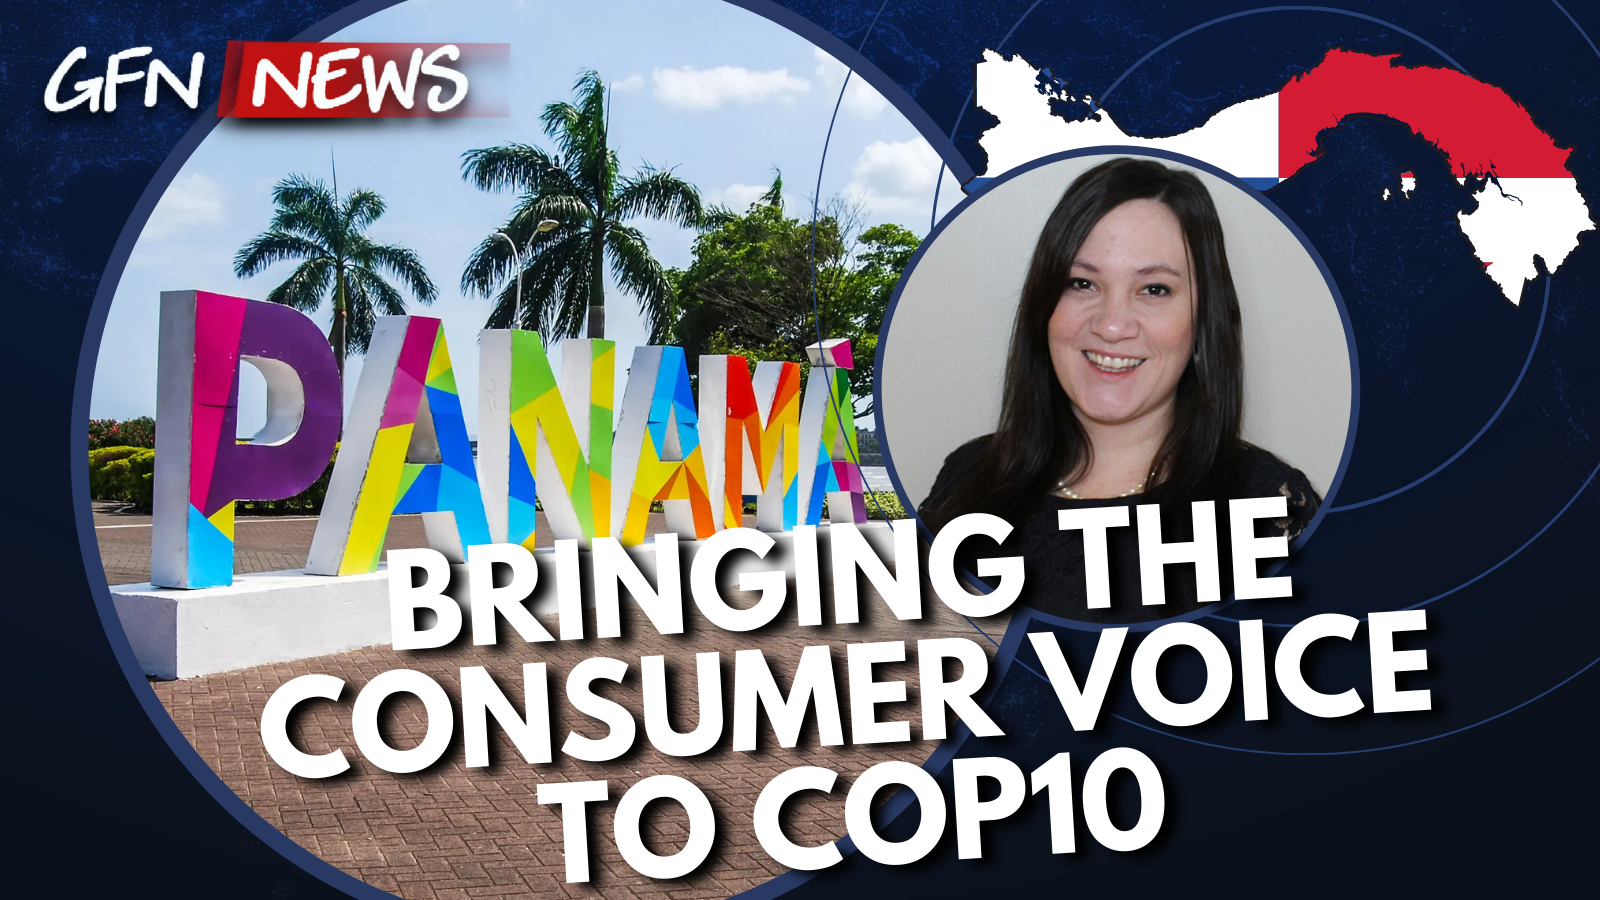 GFN News #88 | BRINGING THE CONSUMER VOICE TO COP10 | Featuring Lindsey Stroud